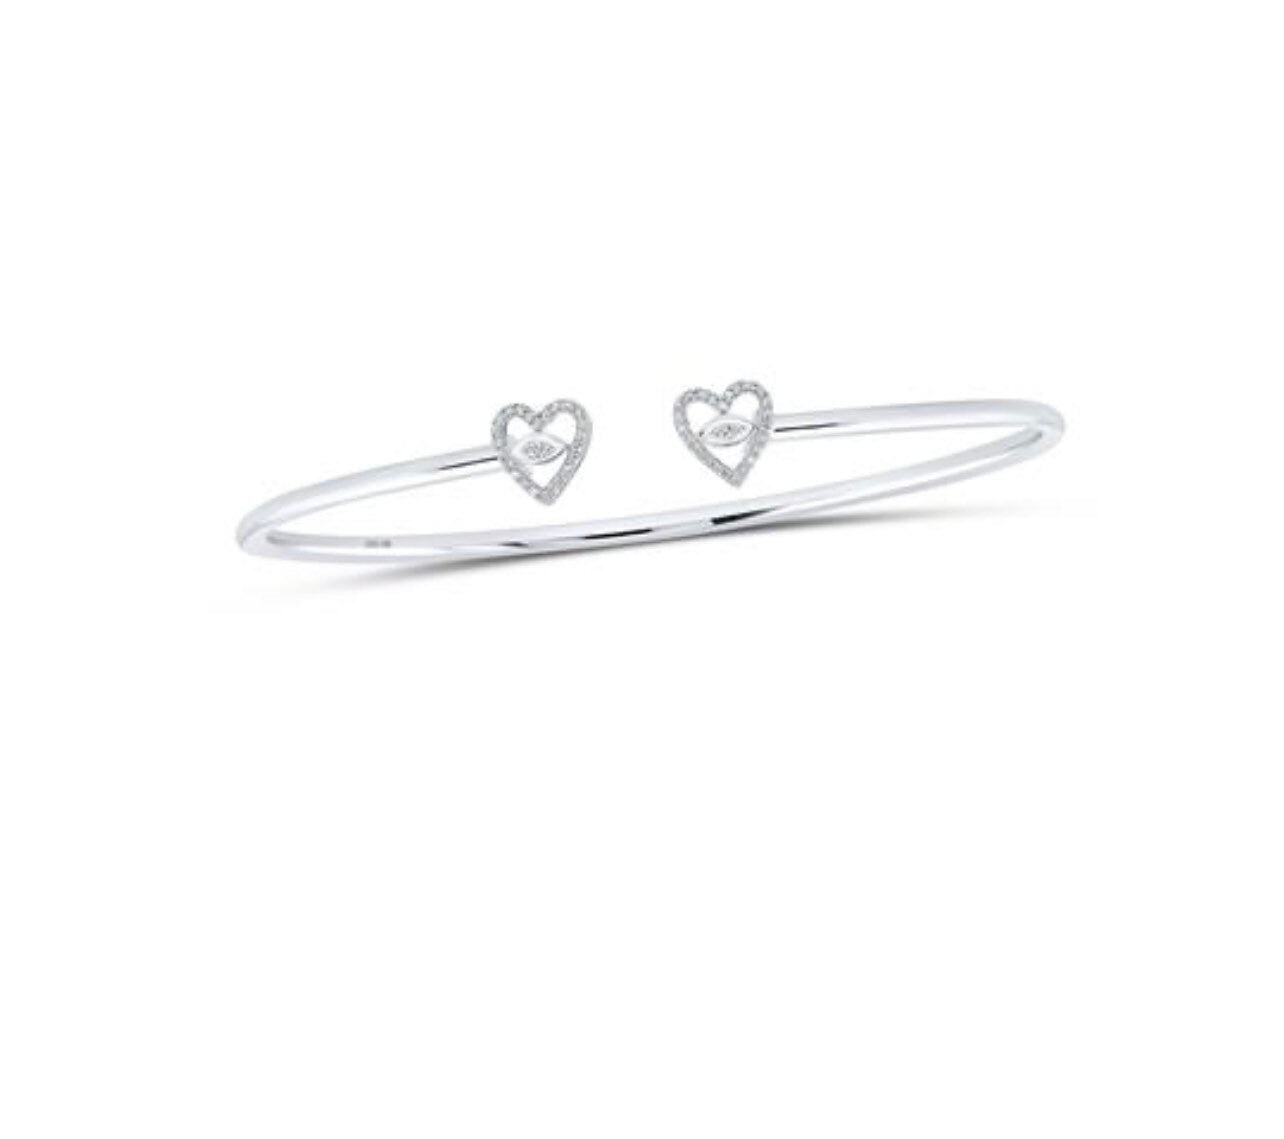 10k solid real gold real Diamond heart bangle, 100% genuine natural diamond, Free Appraisal, beautiful elegant gift for your loved one, Sale